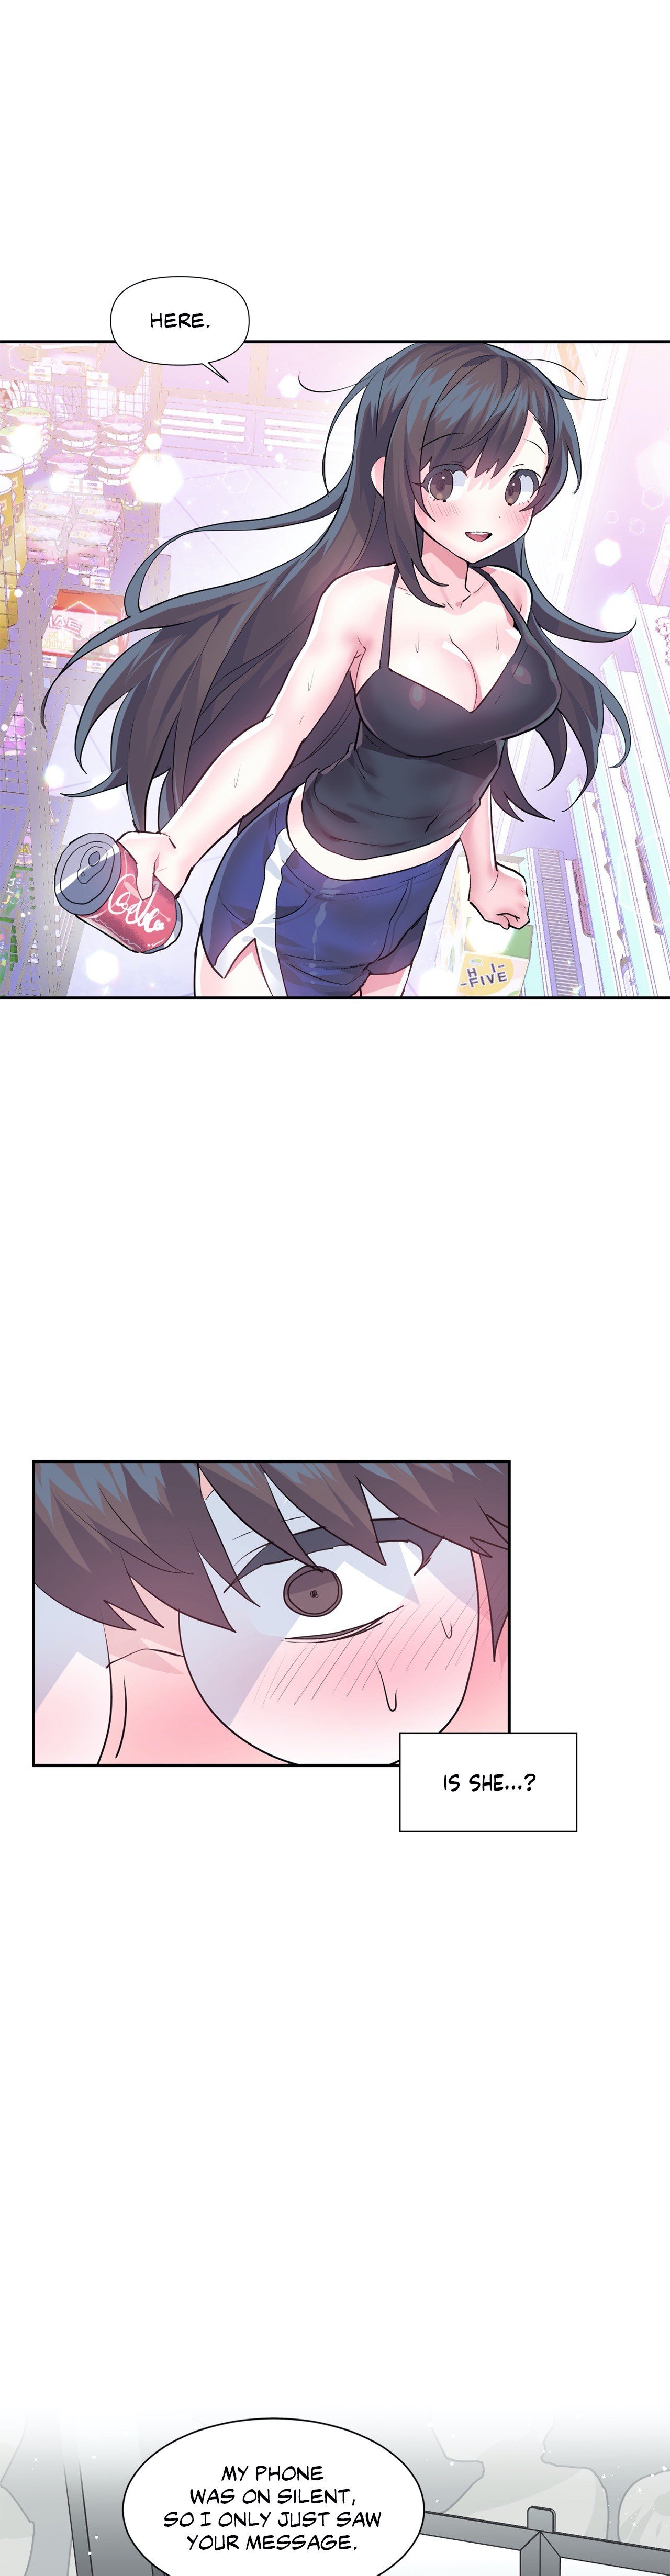 log-in-to-lust-a-land-chap-33-8